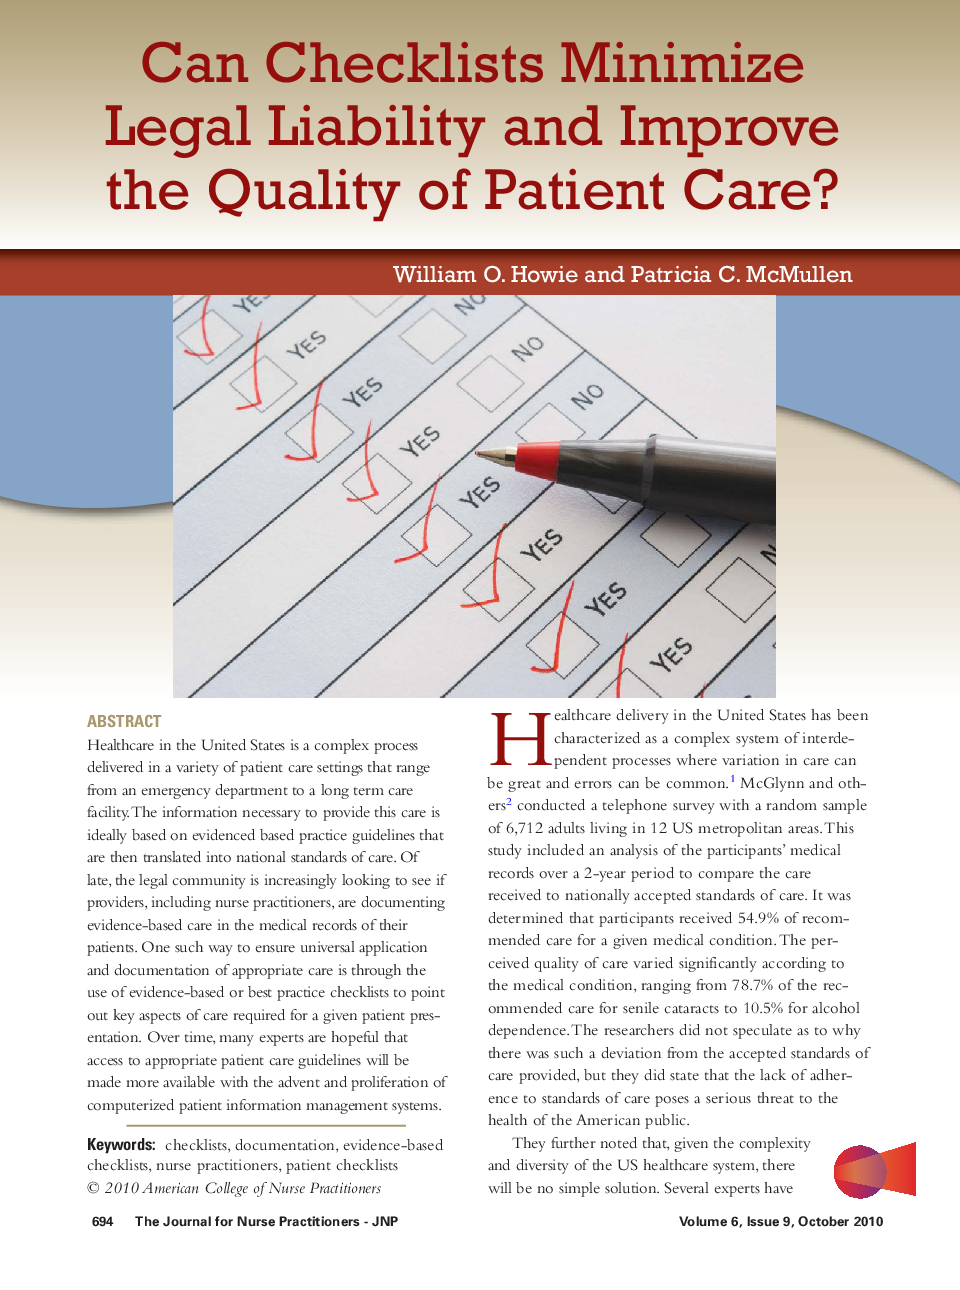 Can Checklists Minimize Legal Liability and Improve the Quality of Patient Care? 